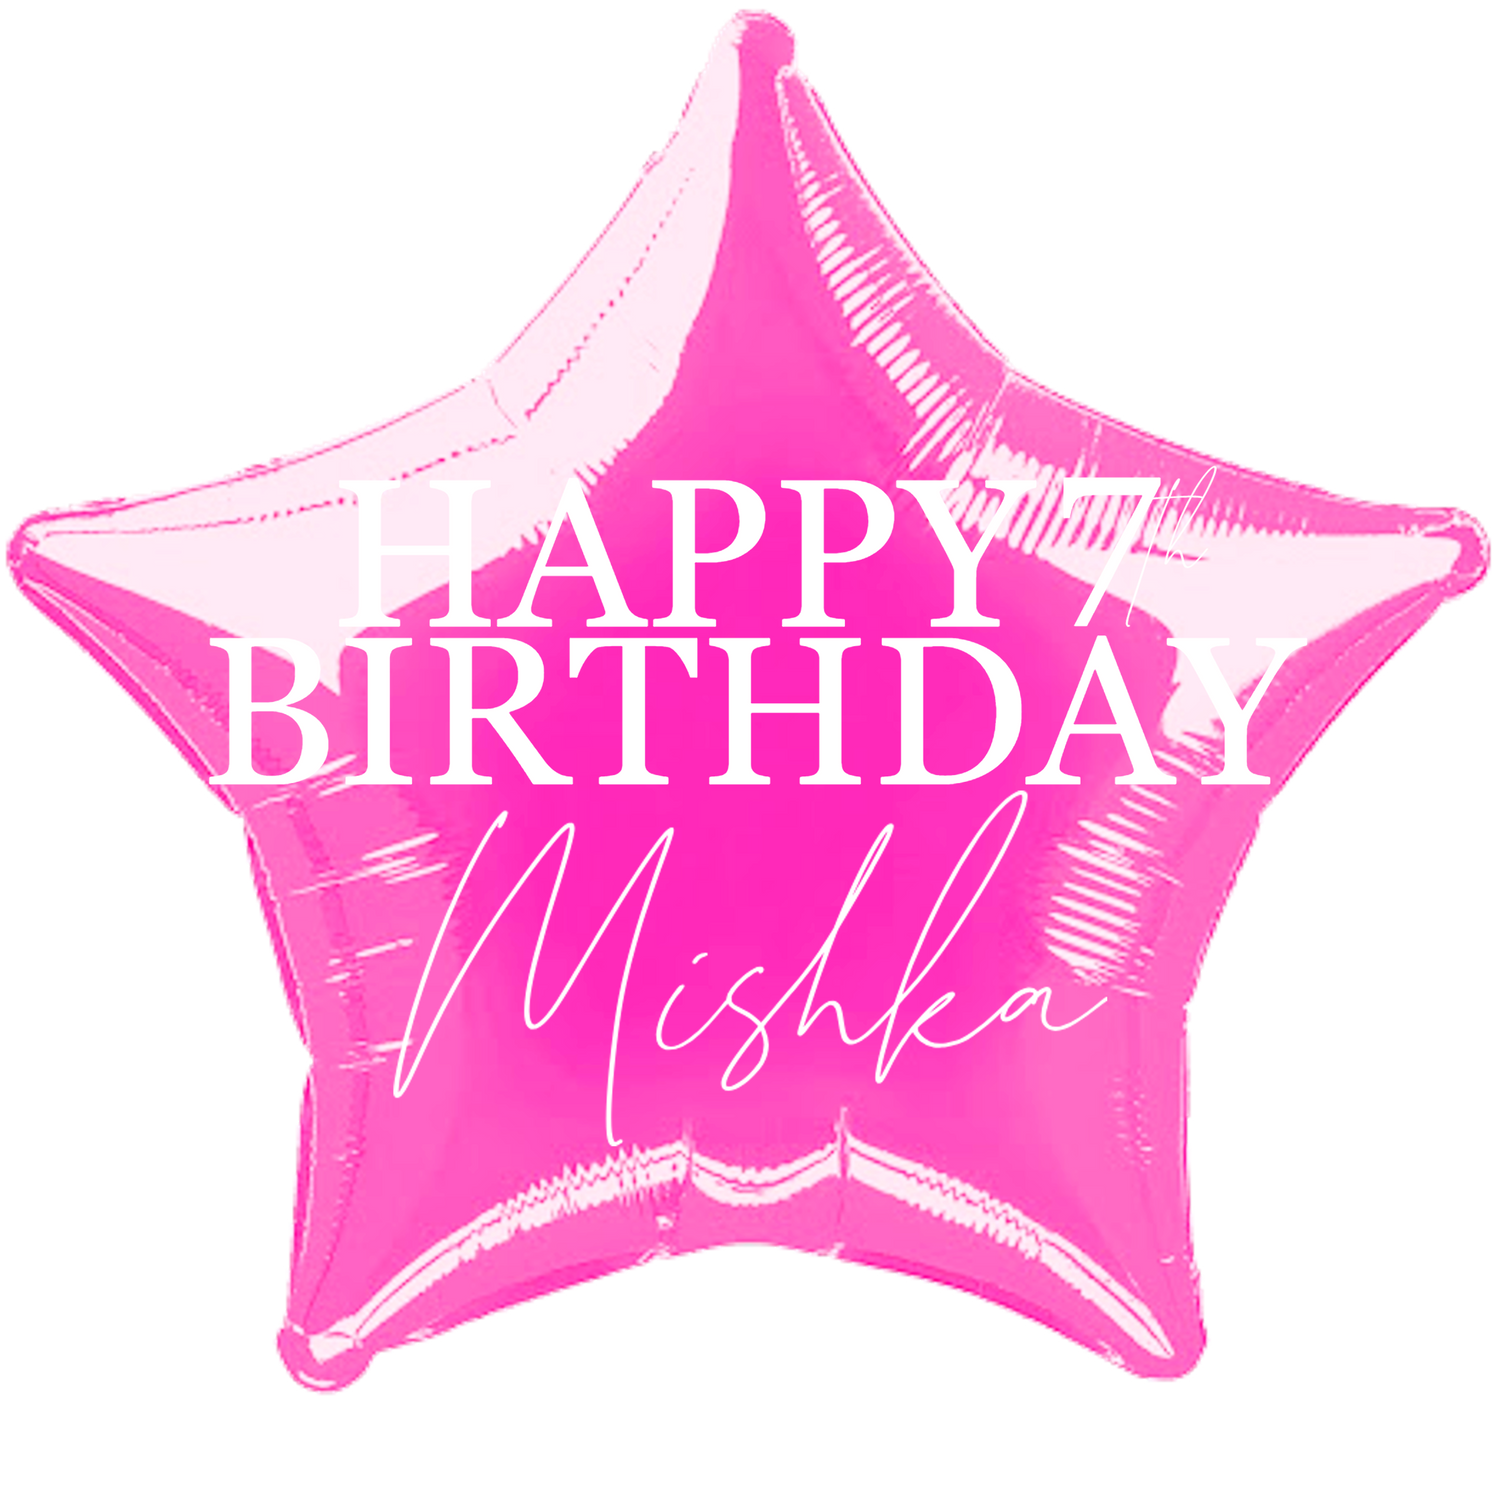 Personalized/Customized Custom Name/Text & Age Hot Pink Star Foil/Mylar Balloons For Six Months/First/Second/Third/Sixteenth/Twenty-First/Thirty/Forty/Fifty/Sixty/Seventieth Birthday, Milestone Birthday or a Special Themed Birthday Event. Supports Helium/Air, Luxury Bespoke Balloons Are a Perfect Surprise For Your Baby, Wife, Mom, Dad, Brother, Sister, Friends & Loved Ones